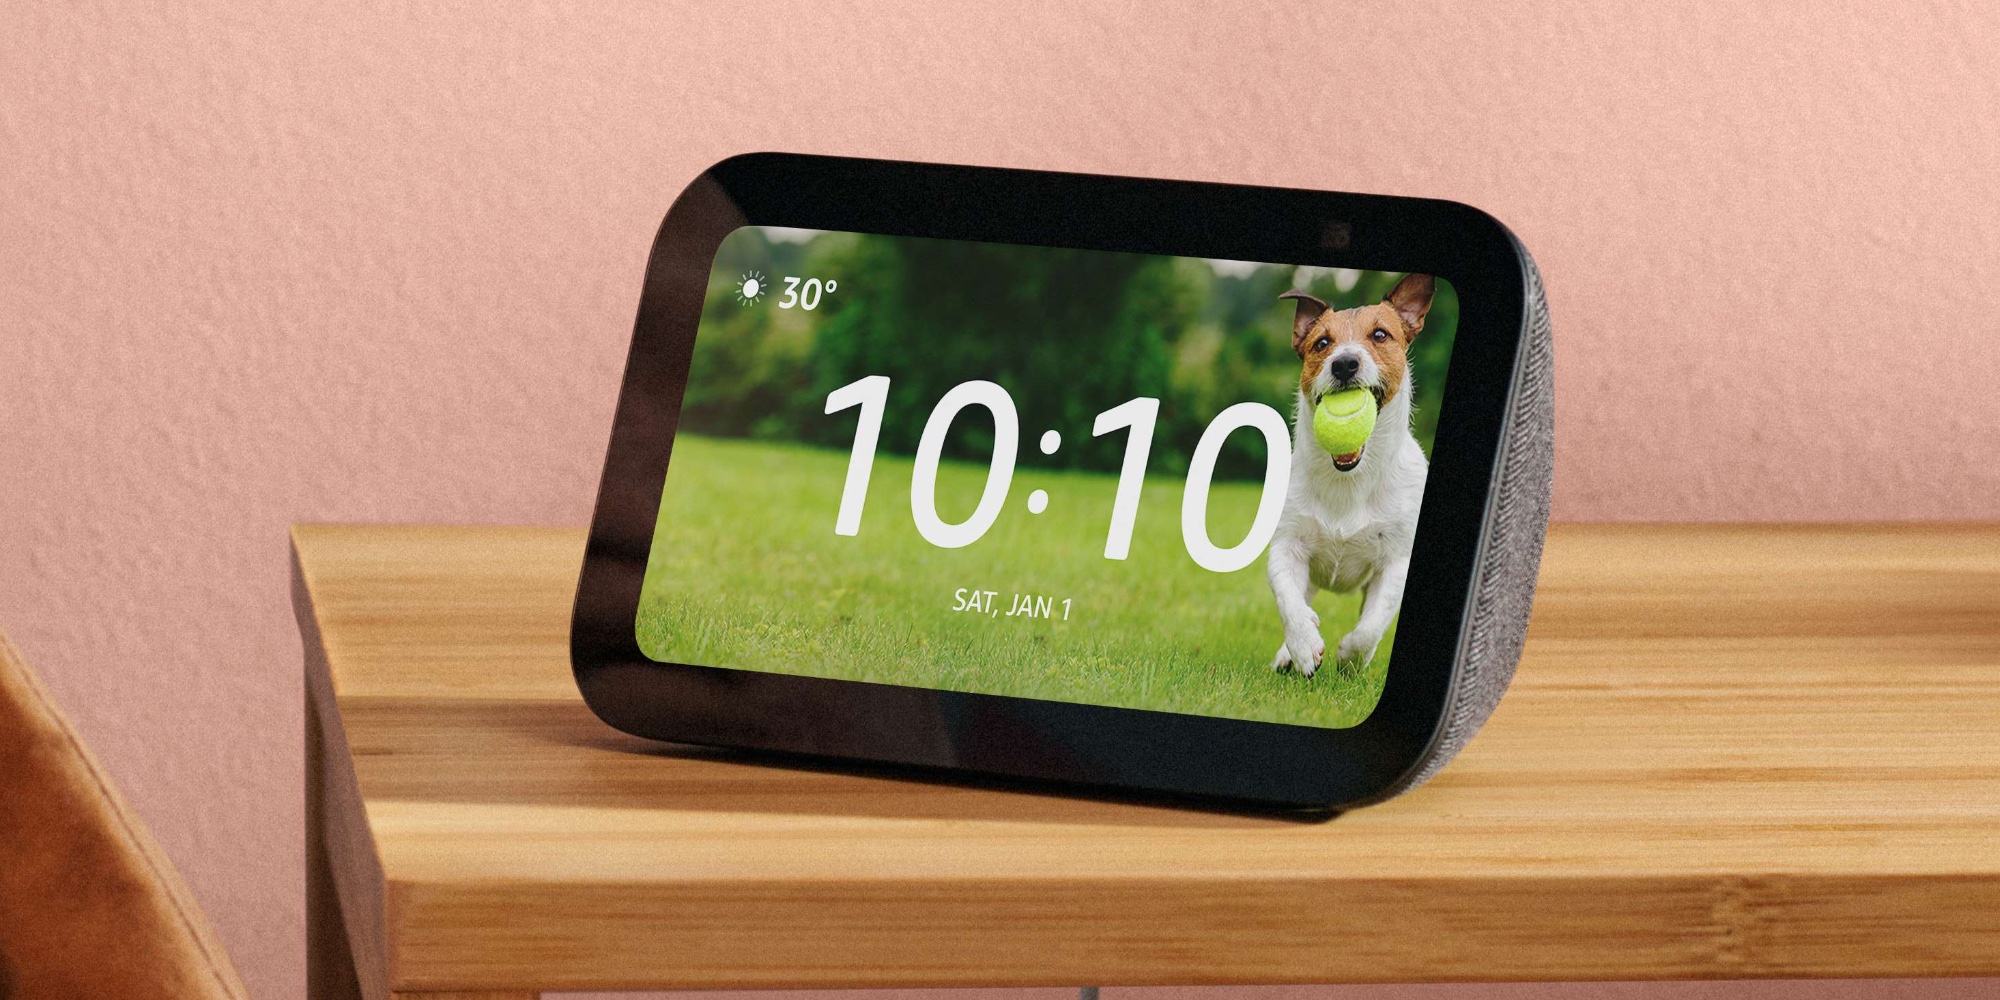 Amazon's all-new Echo Show 5 3rd Gen sees first discount to $45